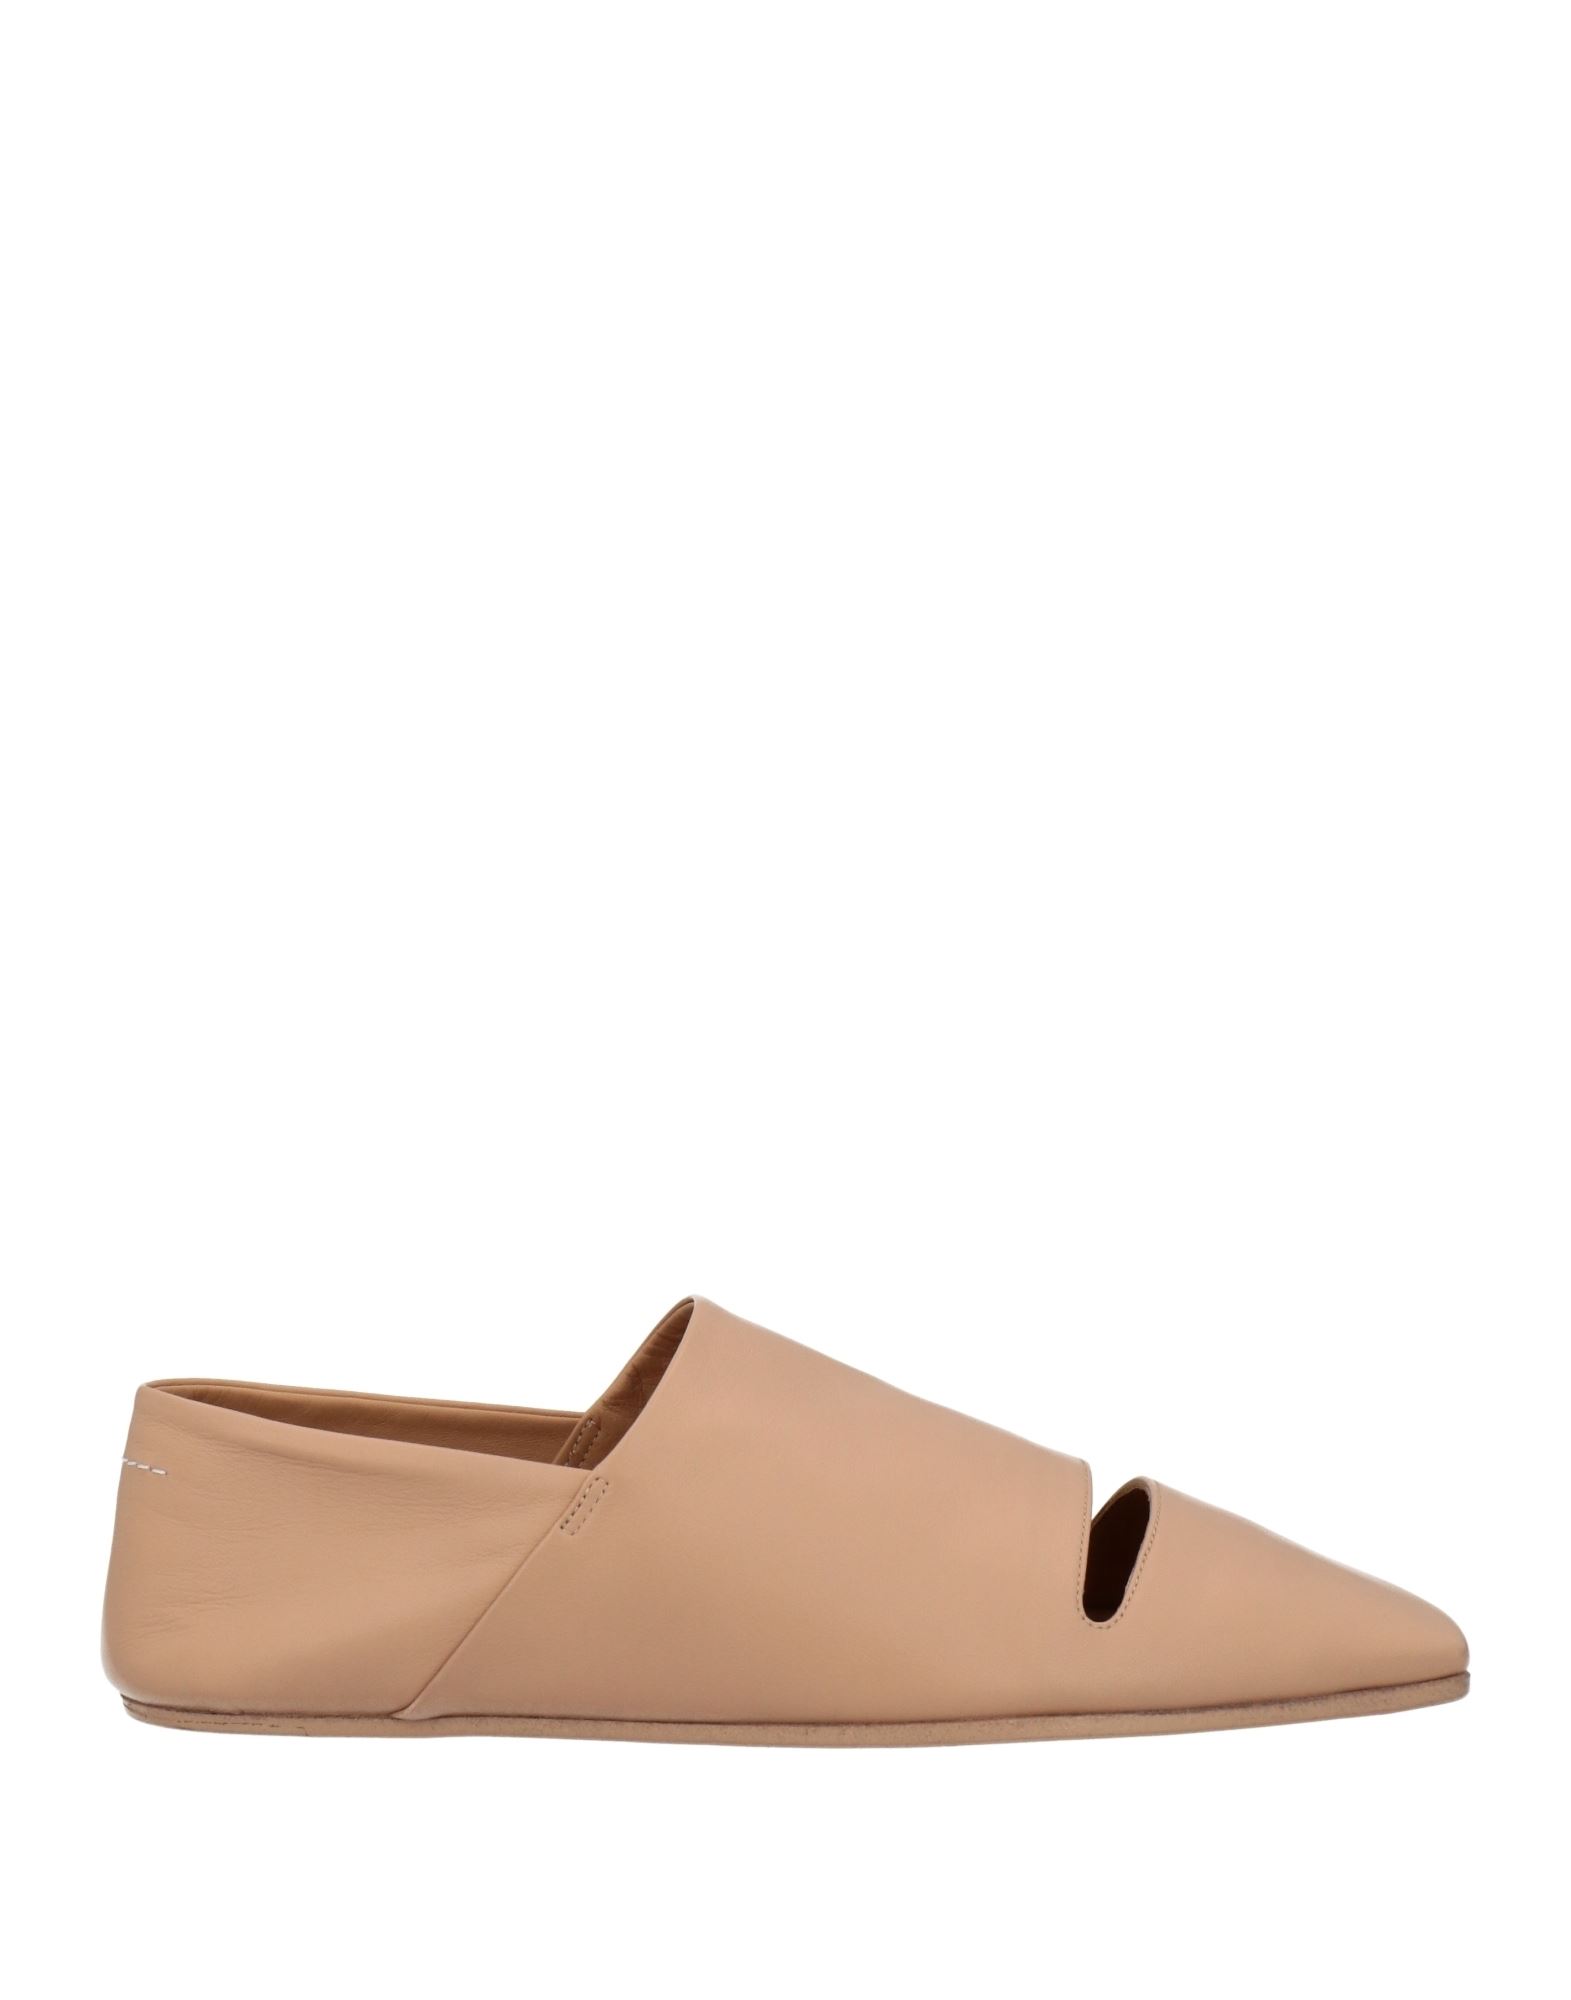 Mm6 Maison Margiela Loafers In Sand